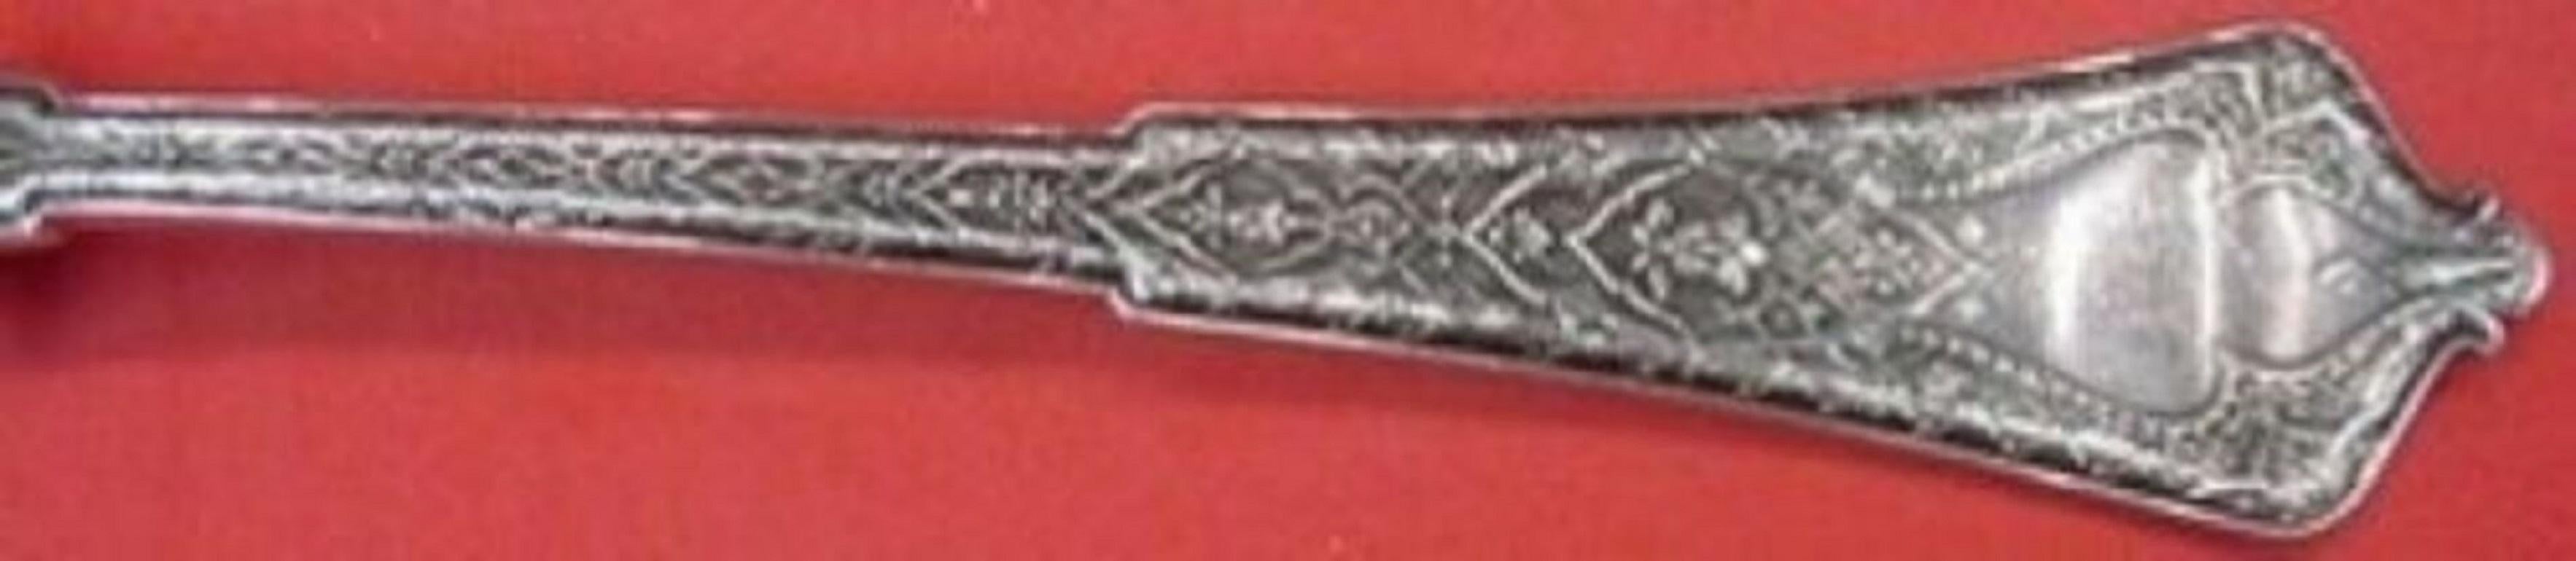 Sterling silver ice cream spoon old style 6 1/4